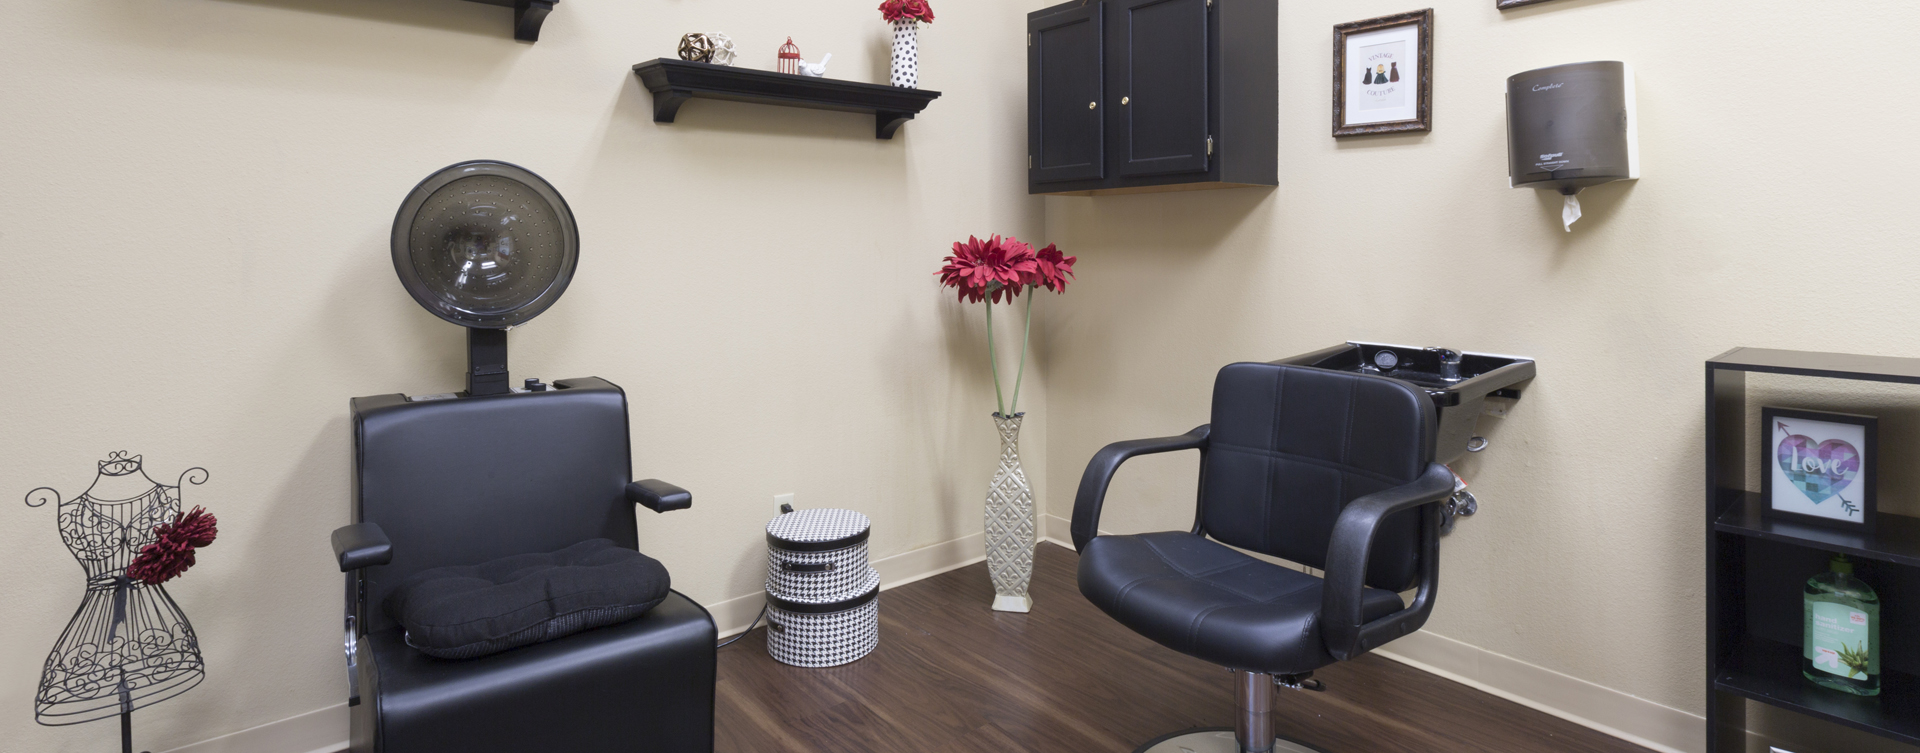 Receive personalized, at-home treatment from our stylist in the salon at Bickford of Omaha - Hickory